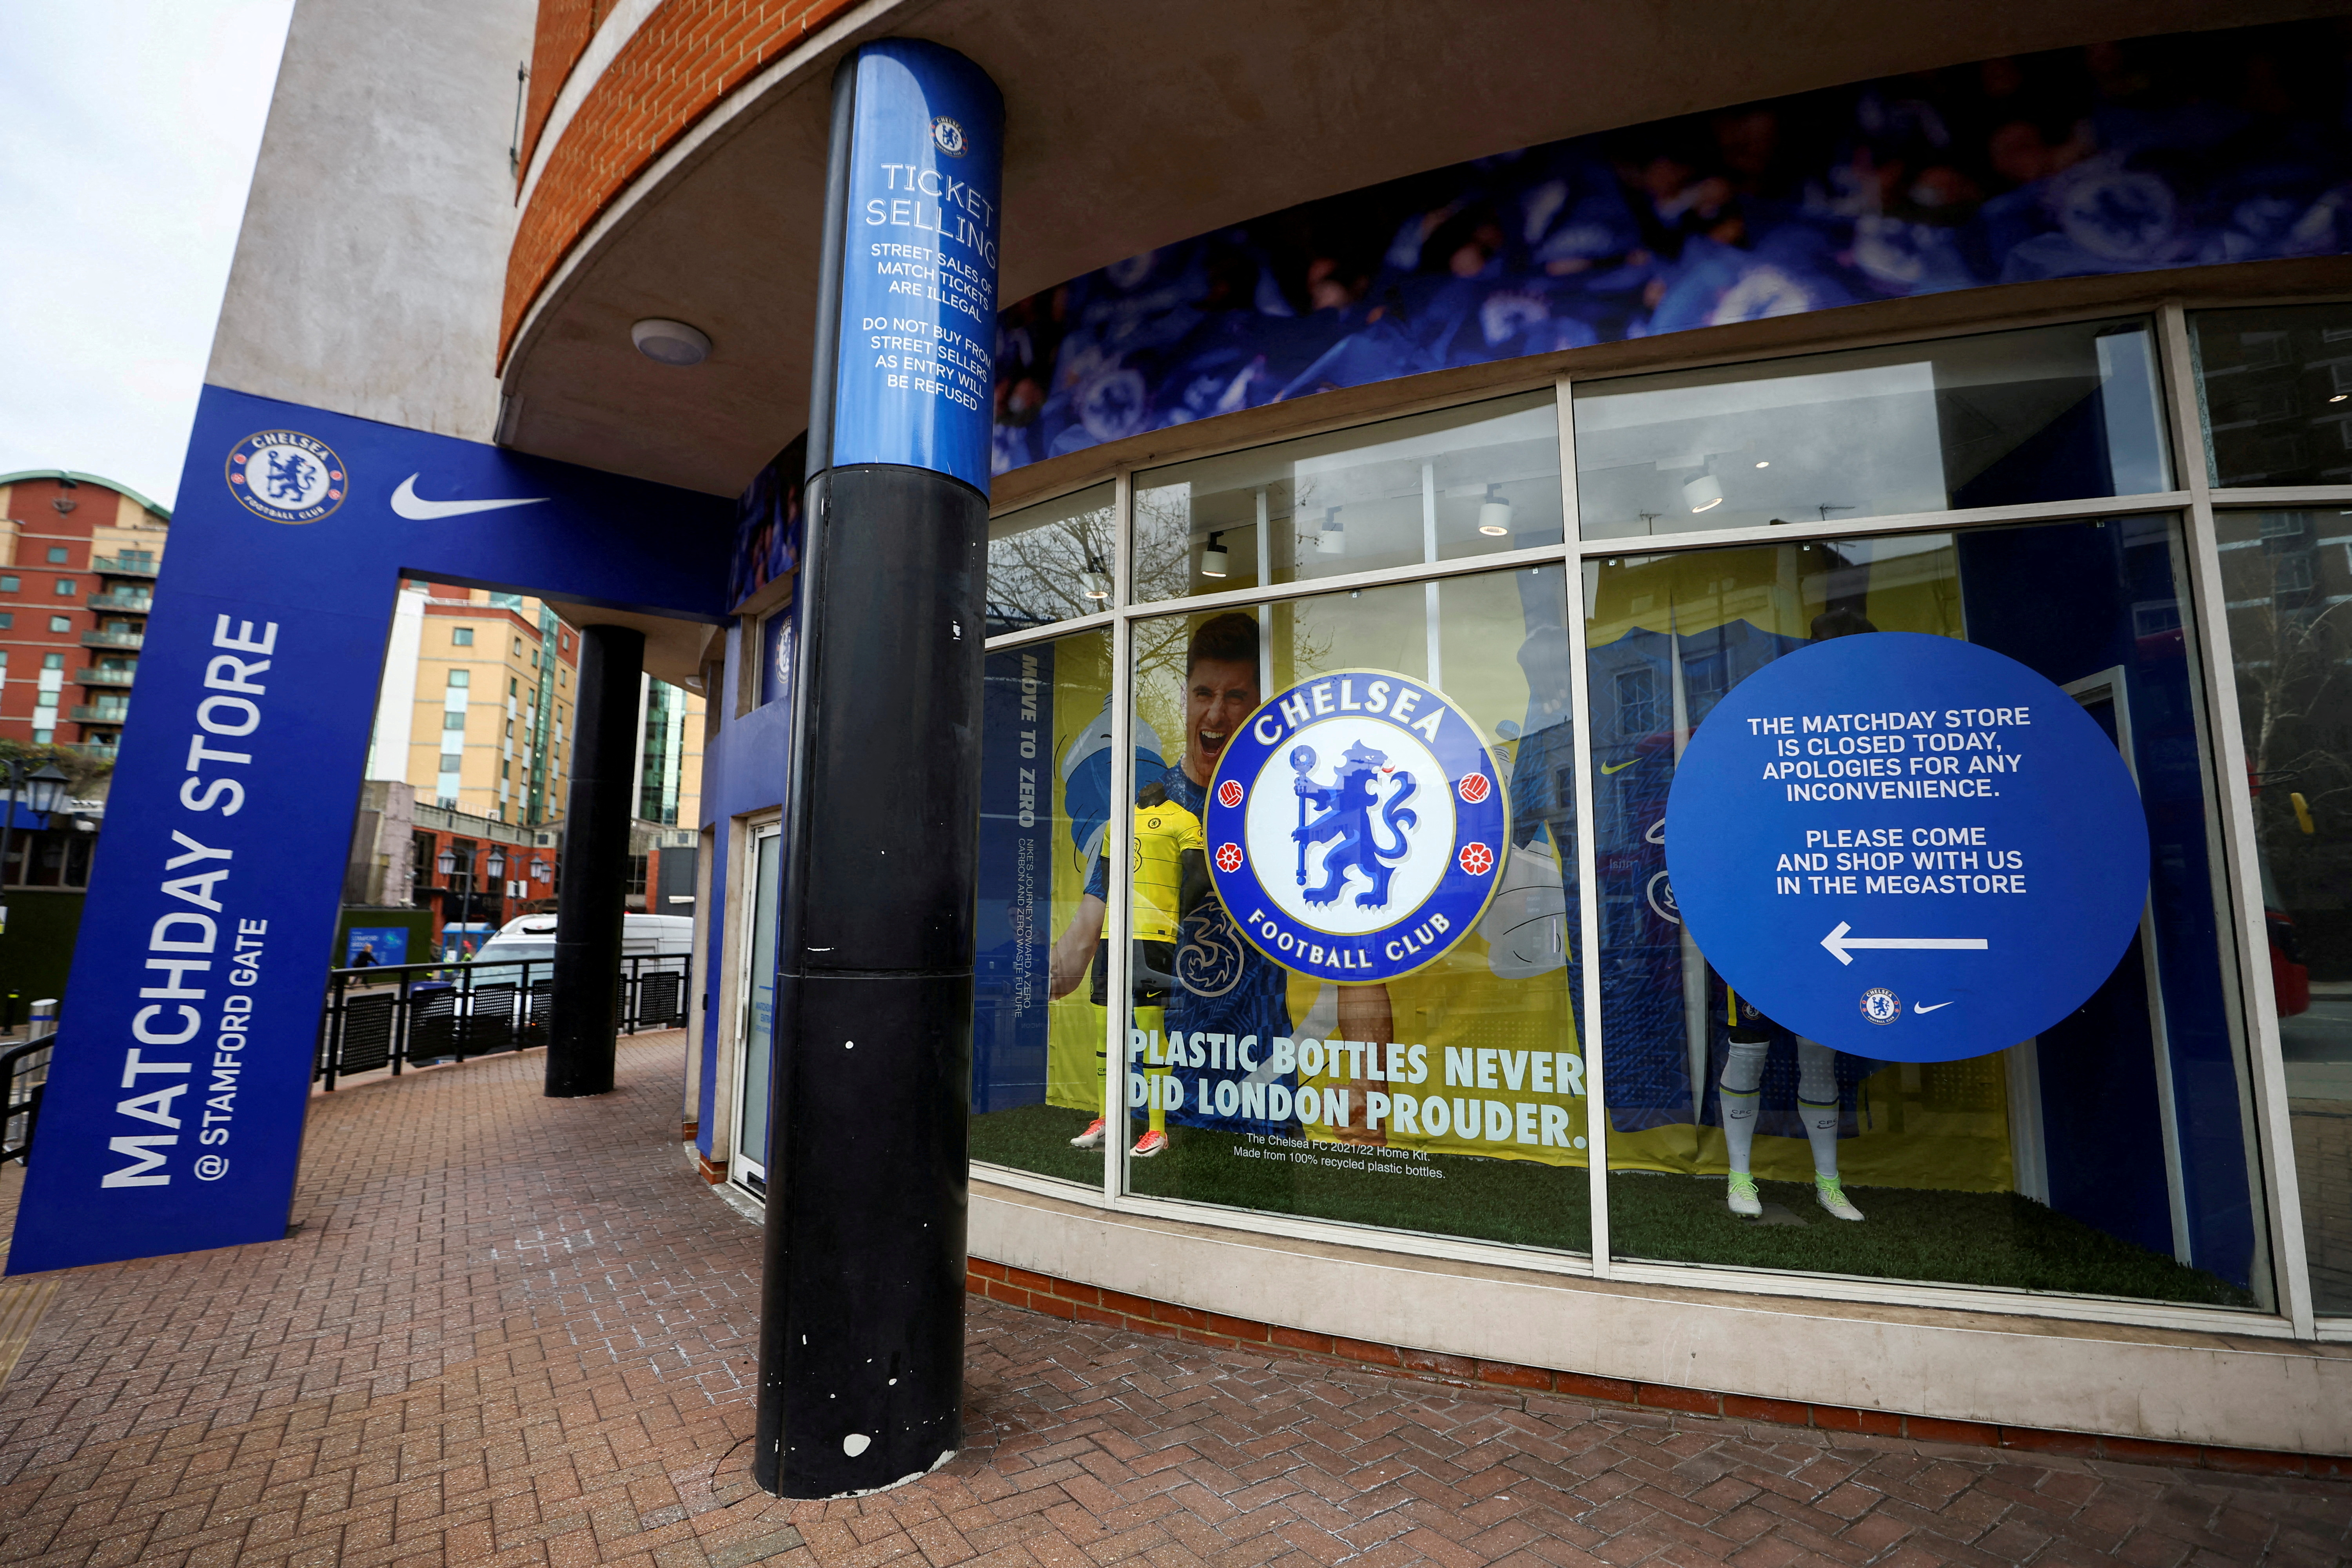 Views outside Chelsea FC after Britain imposed sanctions on its Russian owner, Roman Abramovich